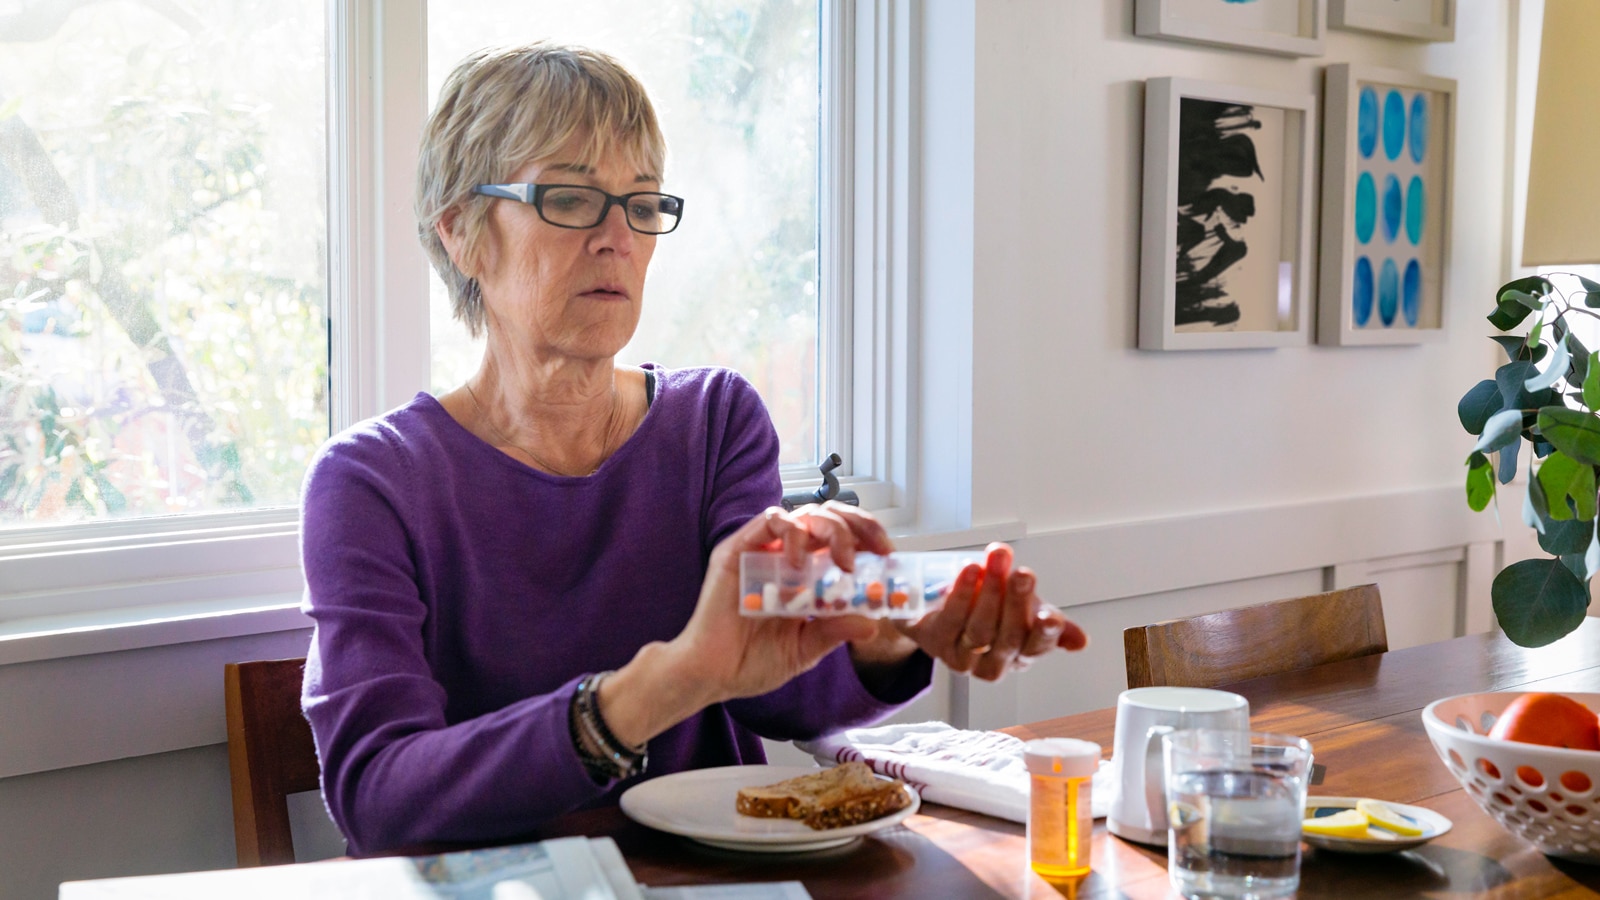 A woman organizes her medication at the breakfast table.